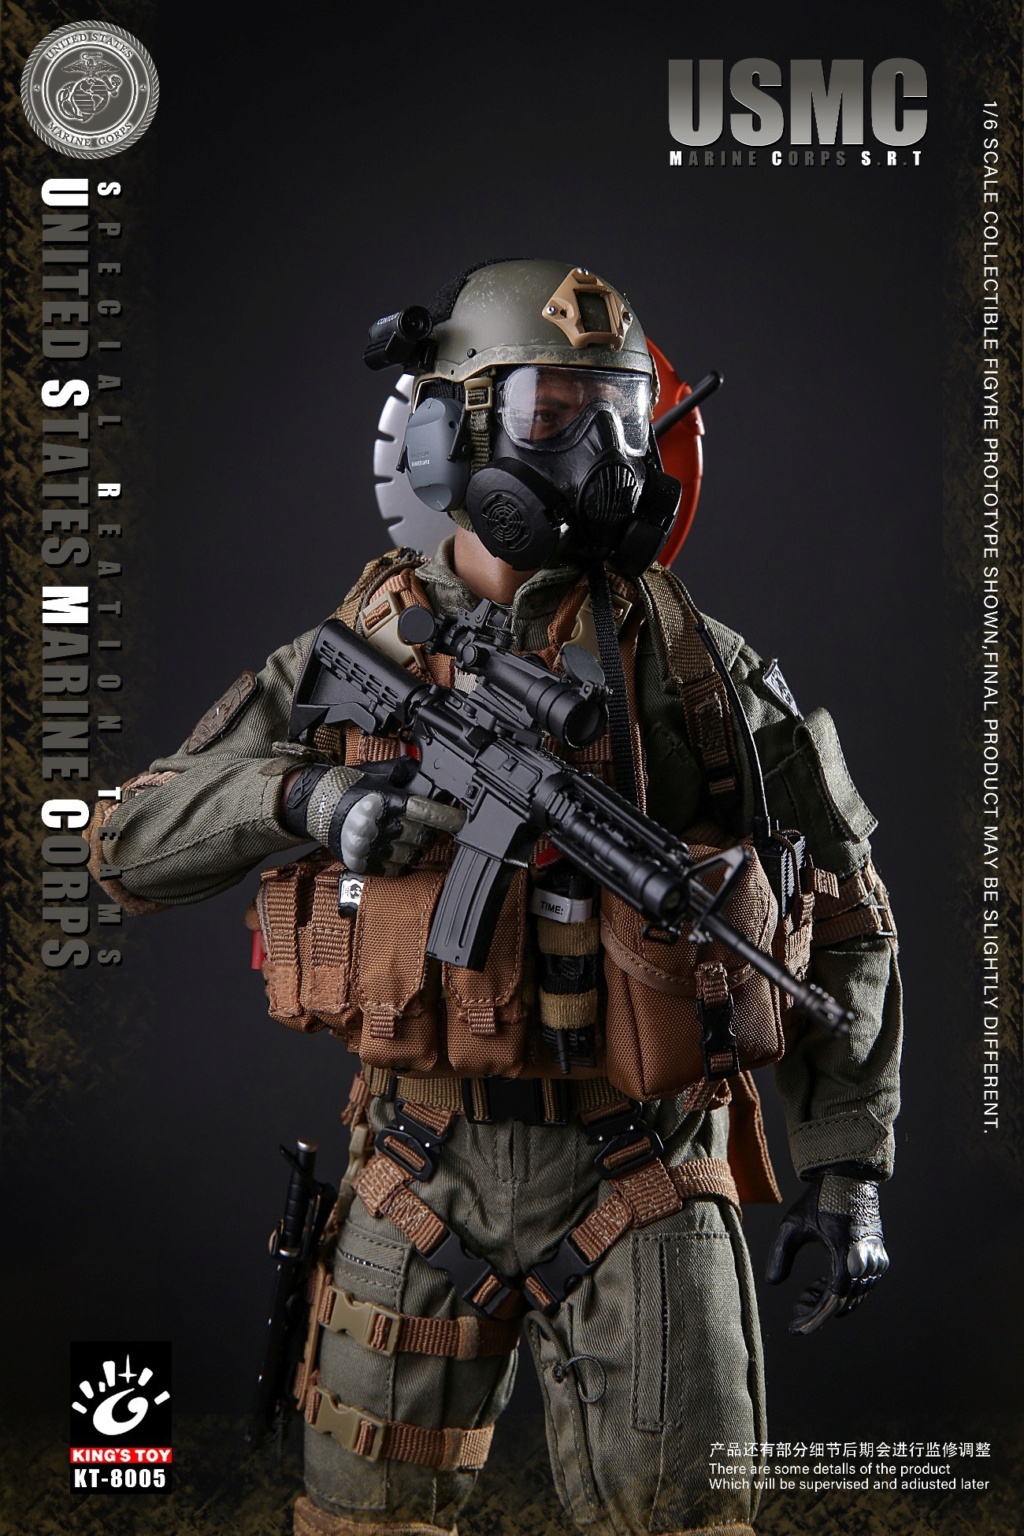 KT-8005 - NEW PRODUCT: King's Toy: 1/6 USMC SRT US Marine Corps Special Response Team (#KT-8005) 09515911